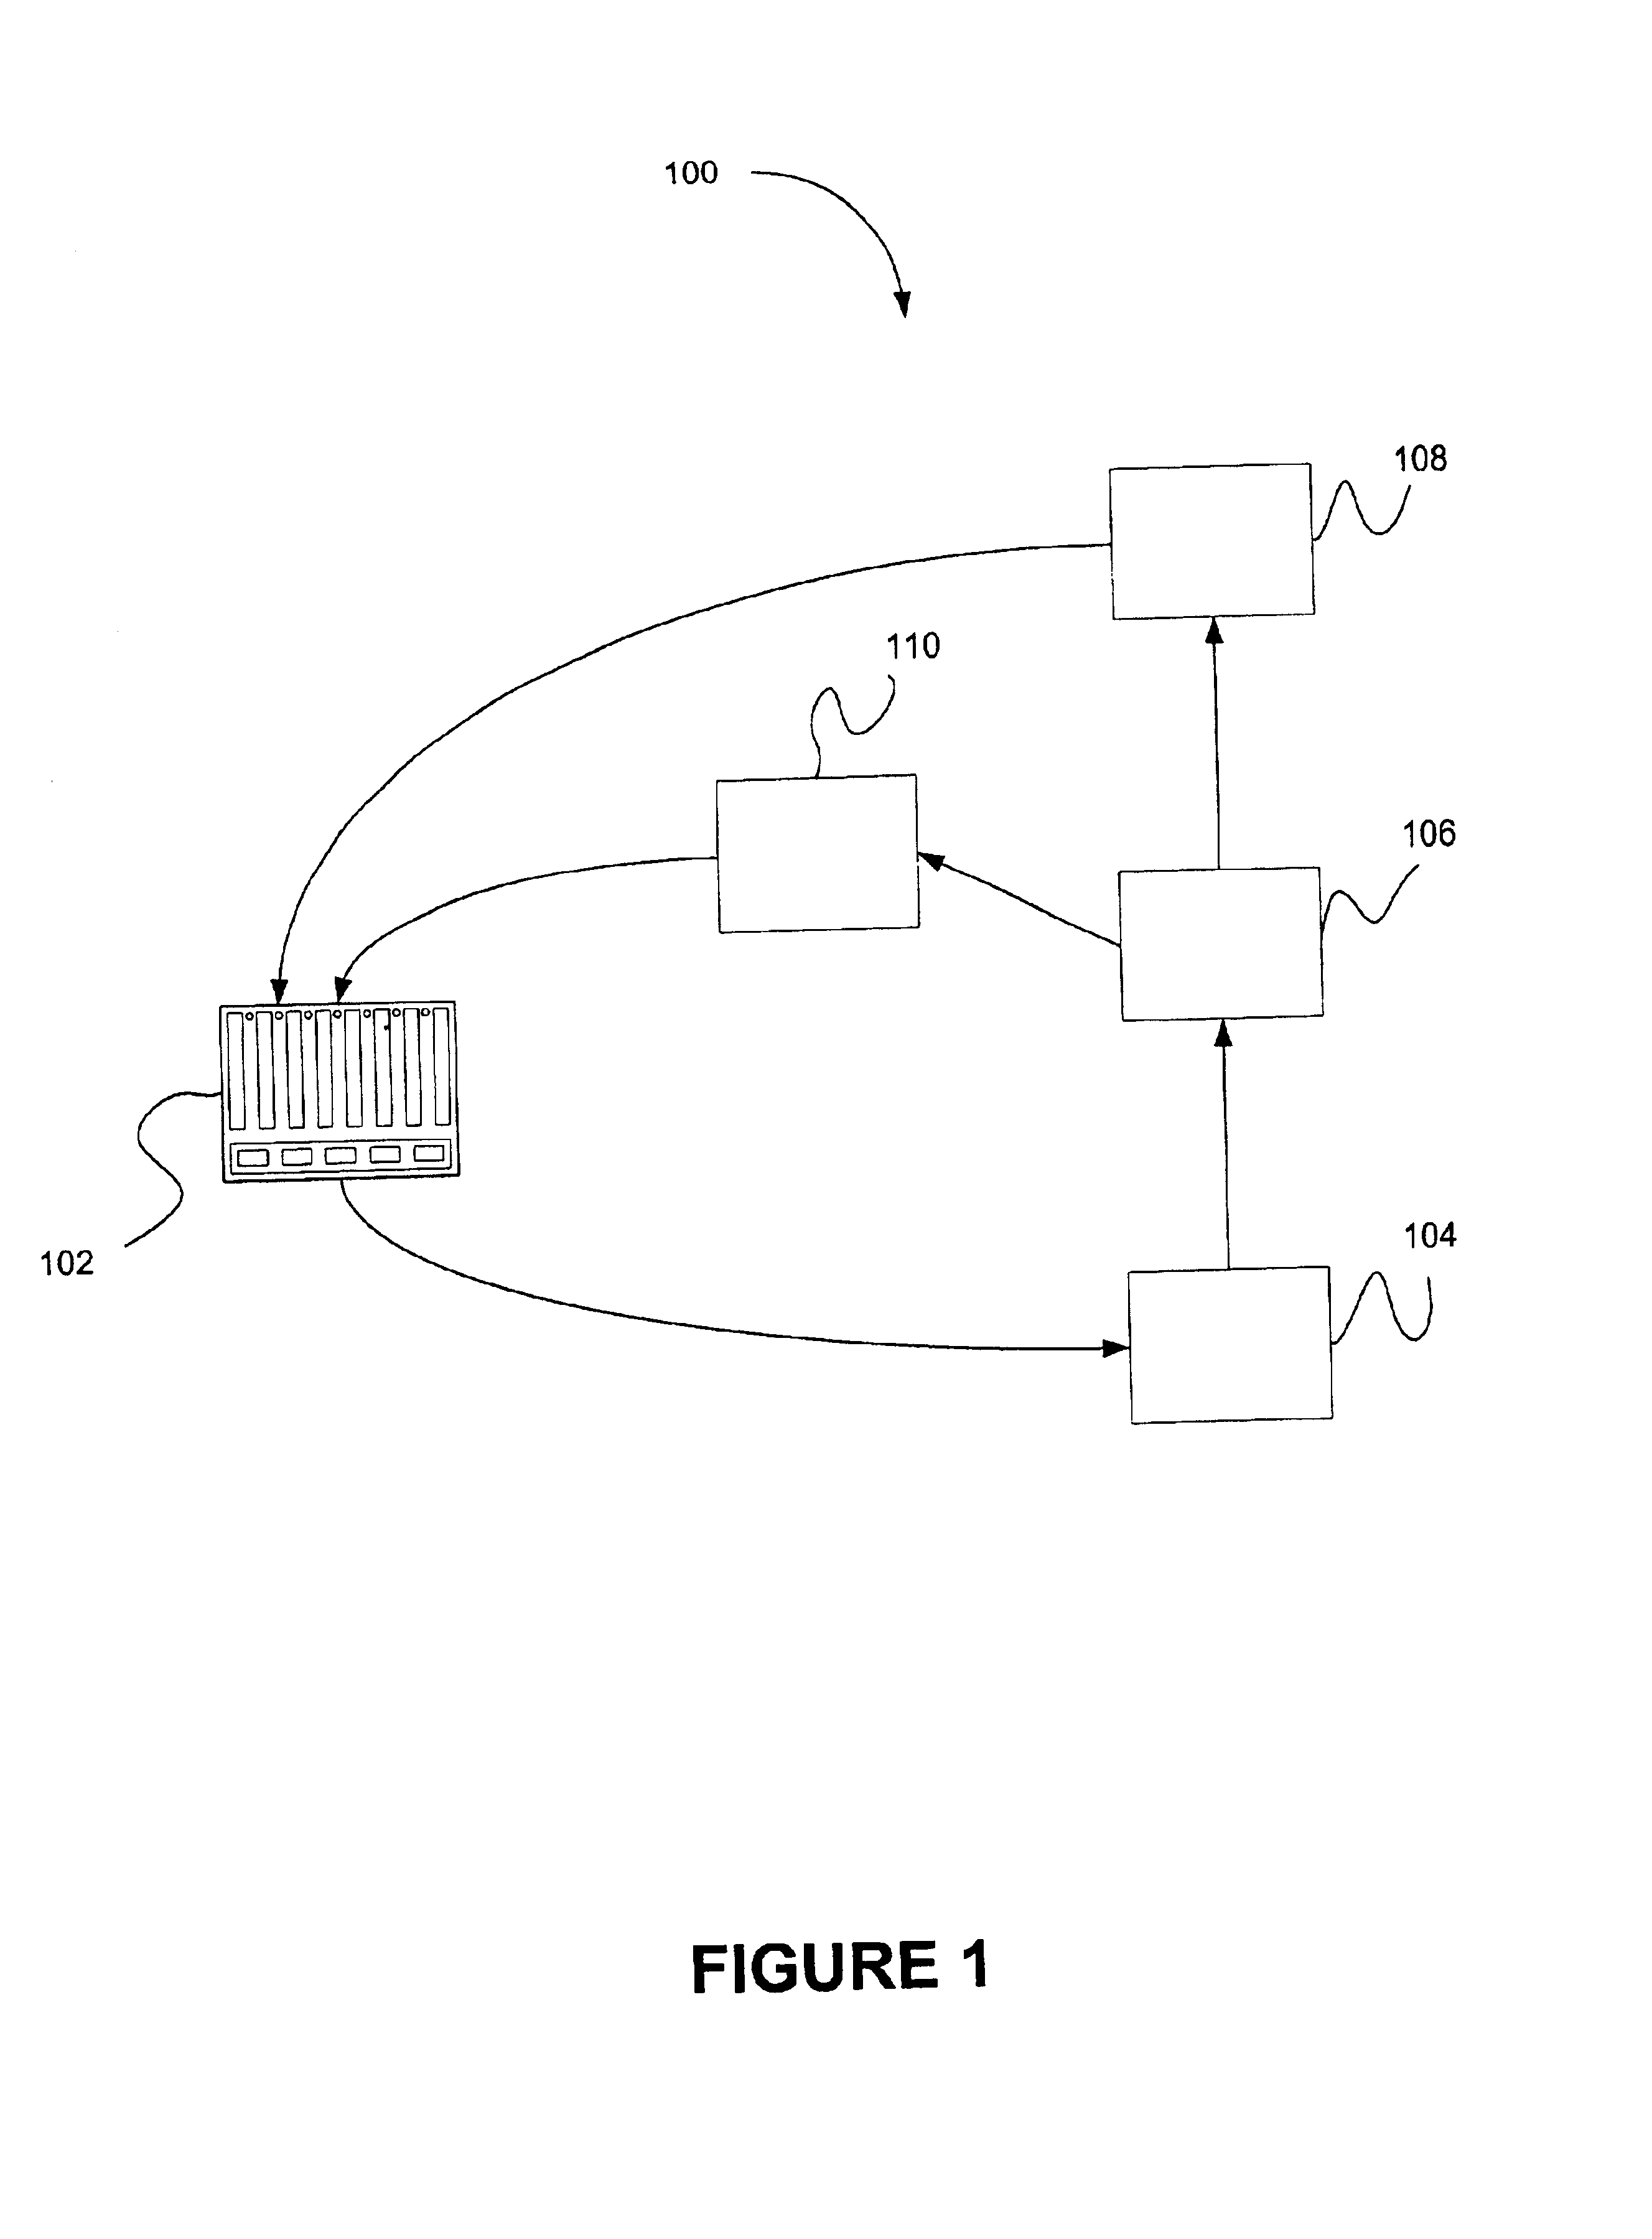 Methods of using fuel cell system configured to provide power to one or more loads